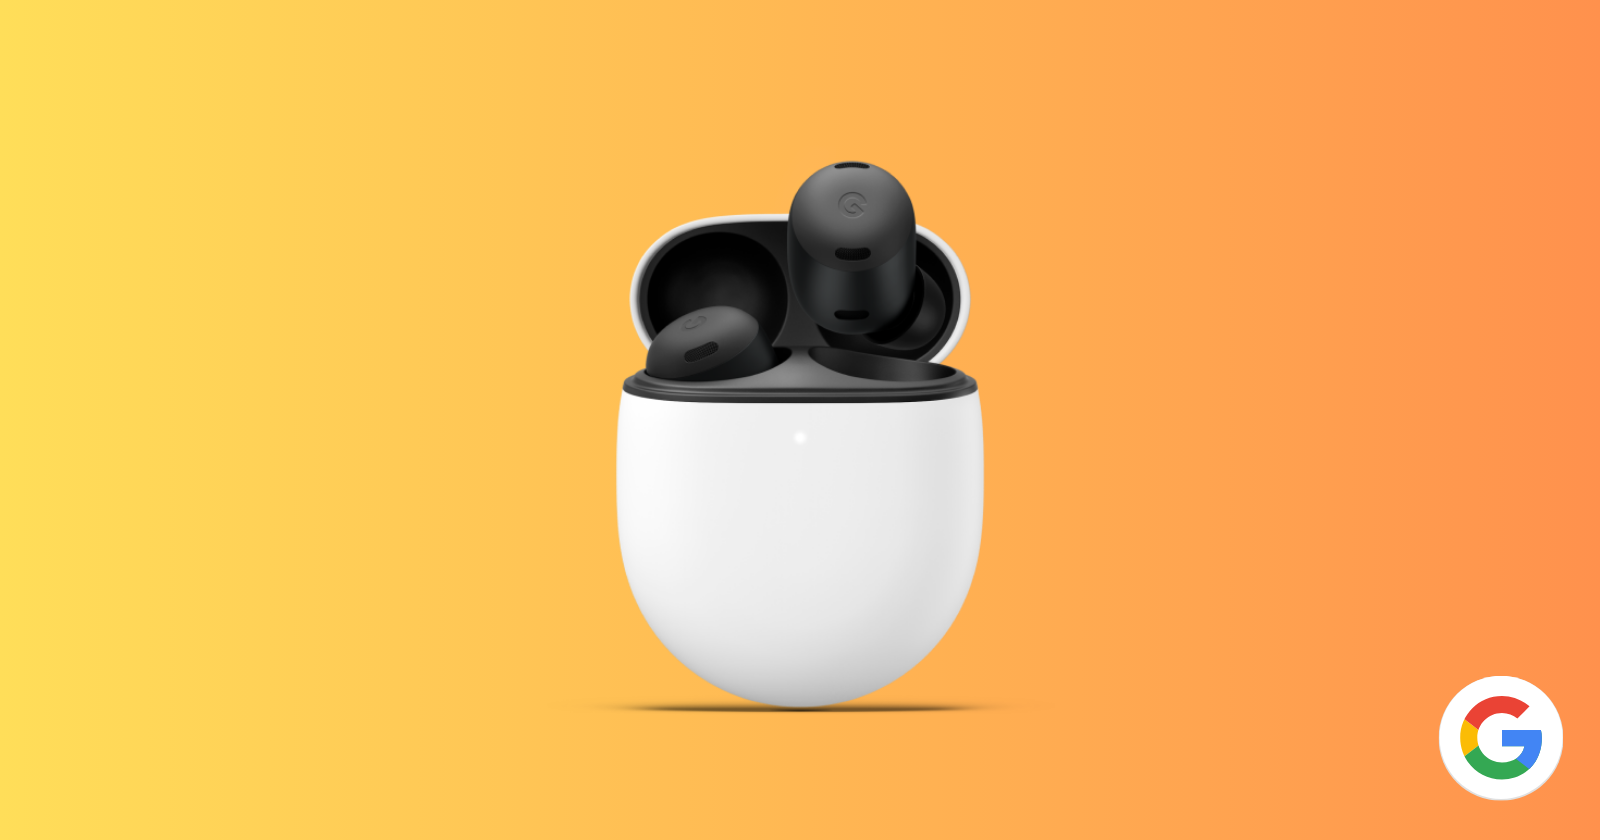 How to enable Conversation Detection on Pixel Buds Pro